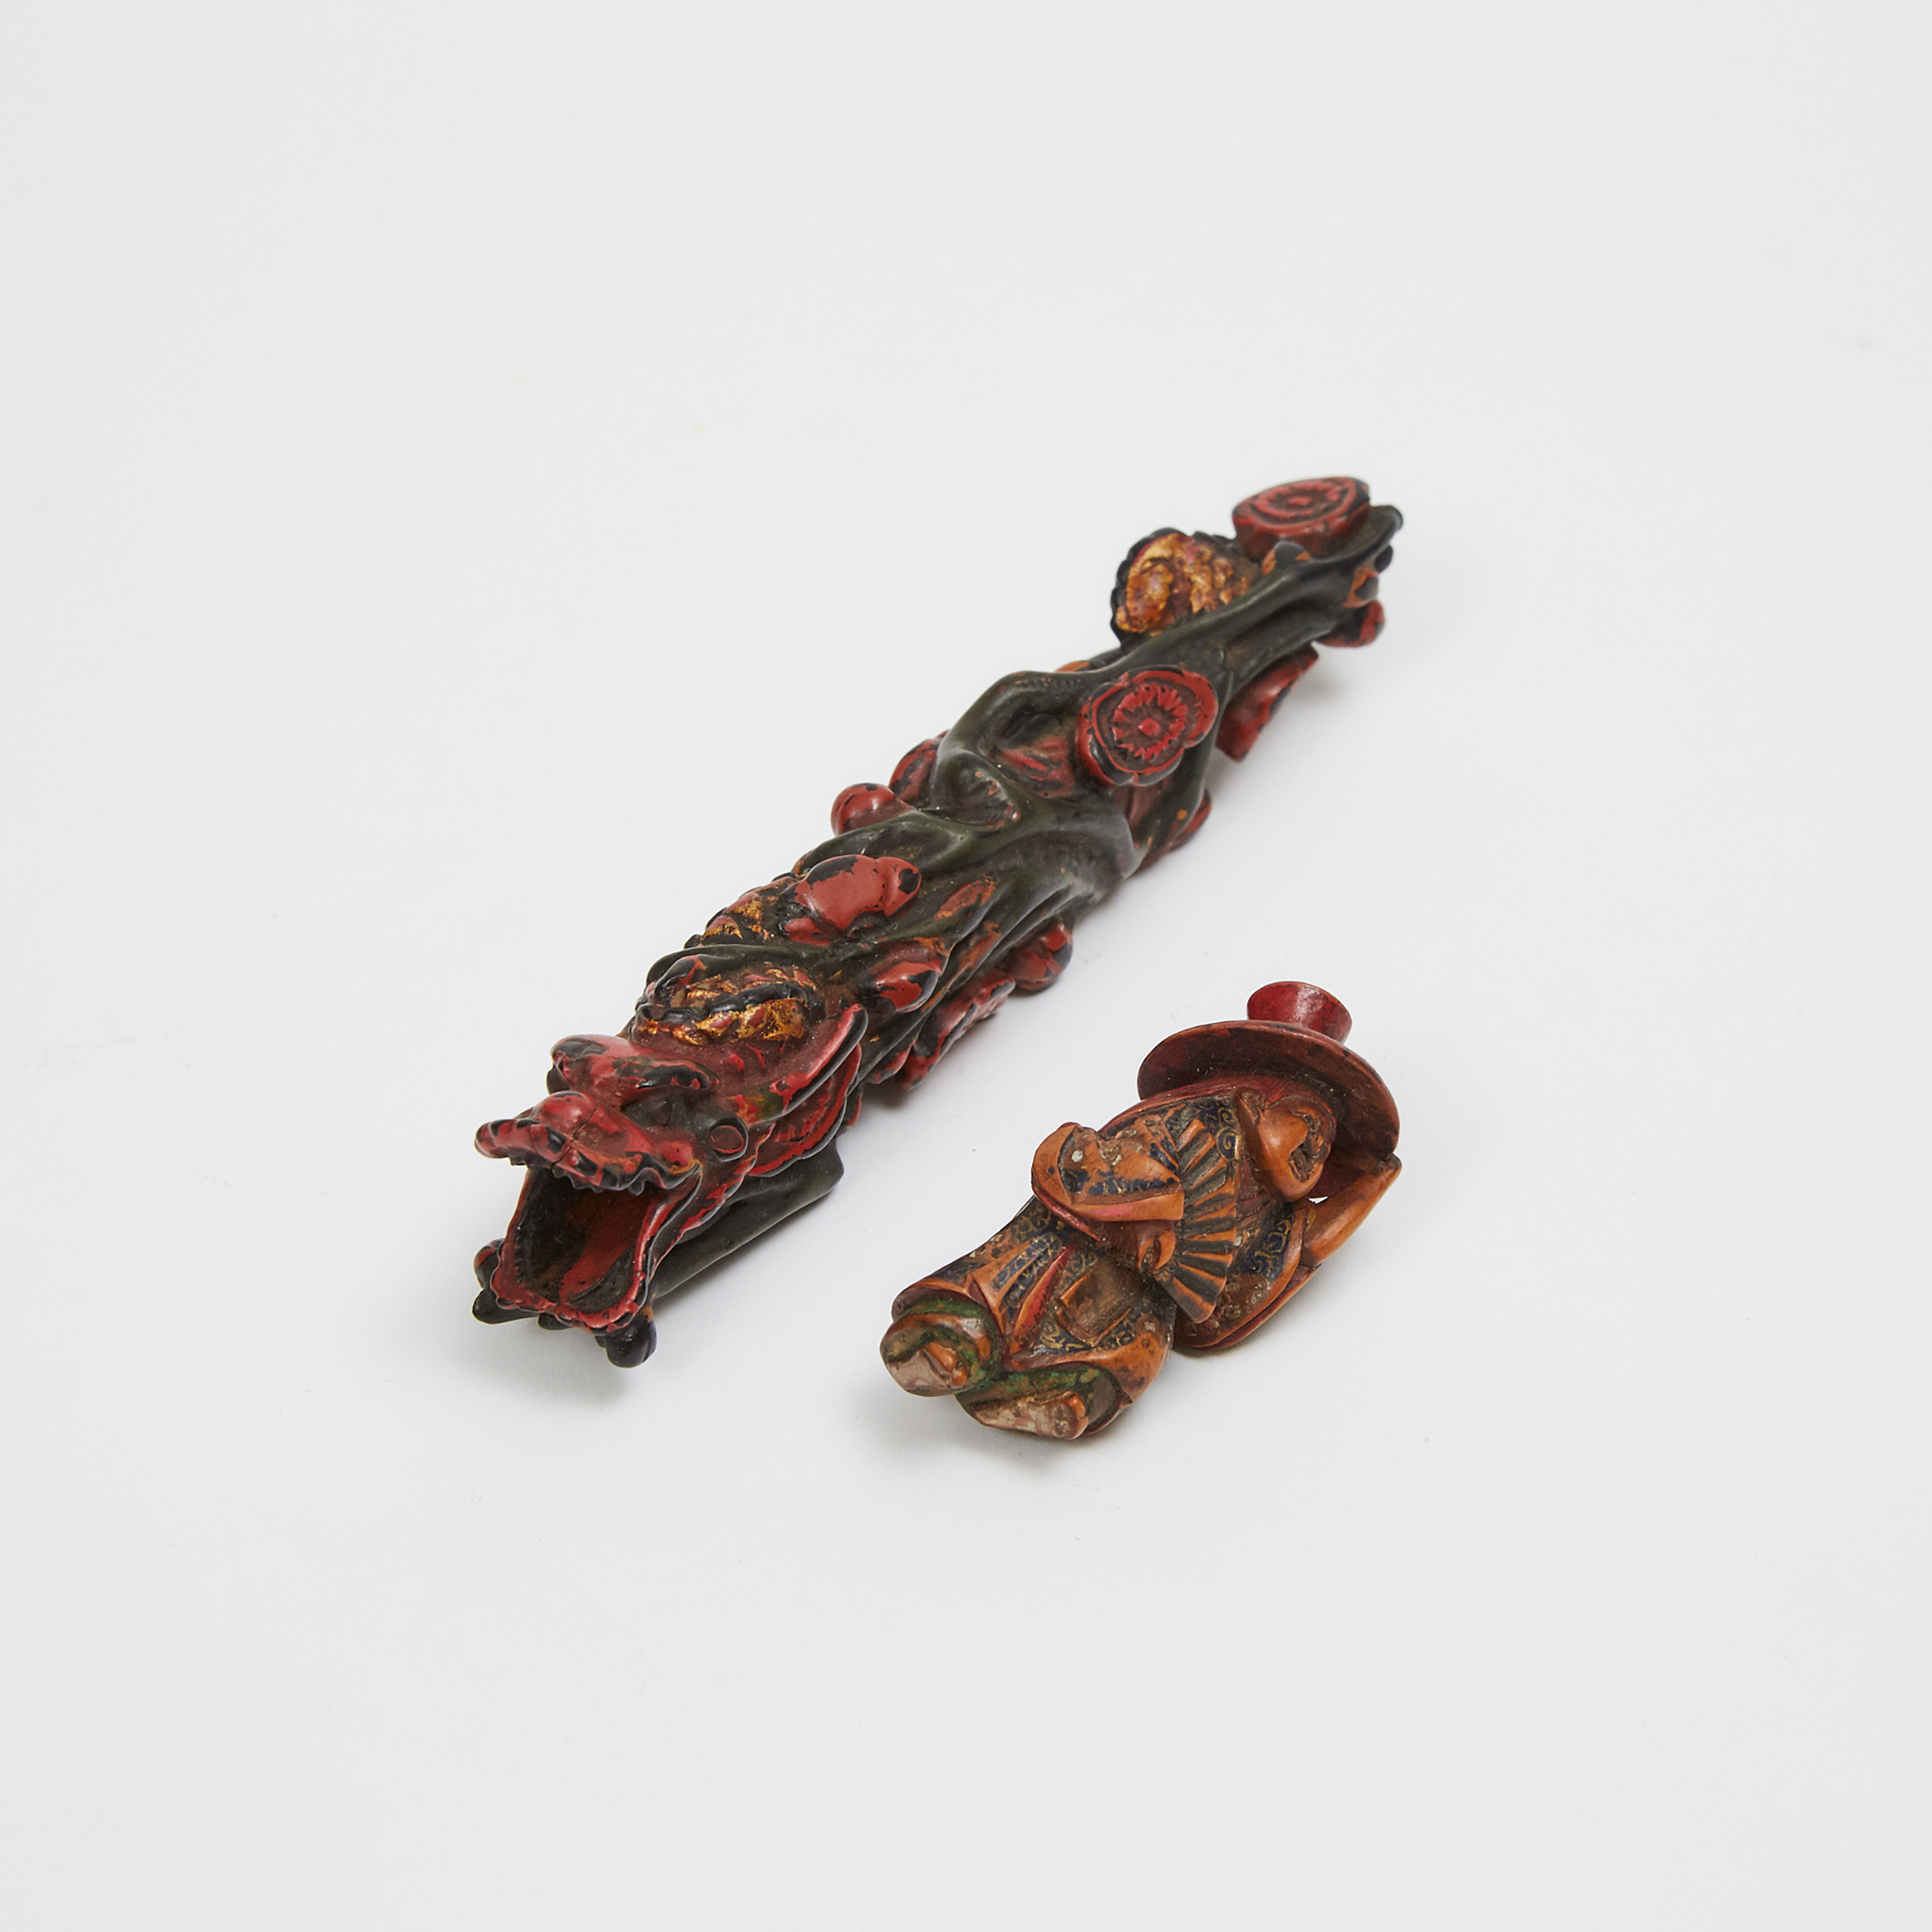 After Shuzan, A Painted Wood Netsuke of a Dragon, together with a Drunk Dancing Okame, 18th Century or Later